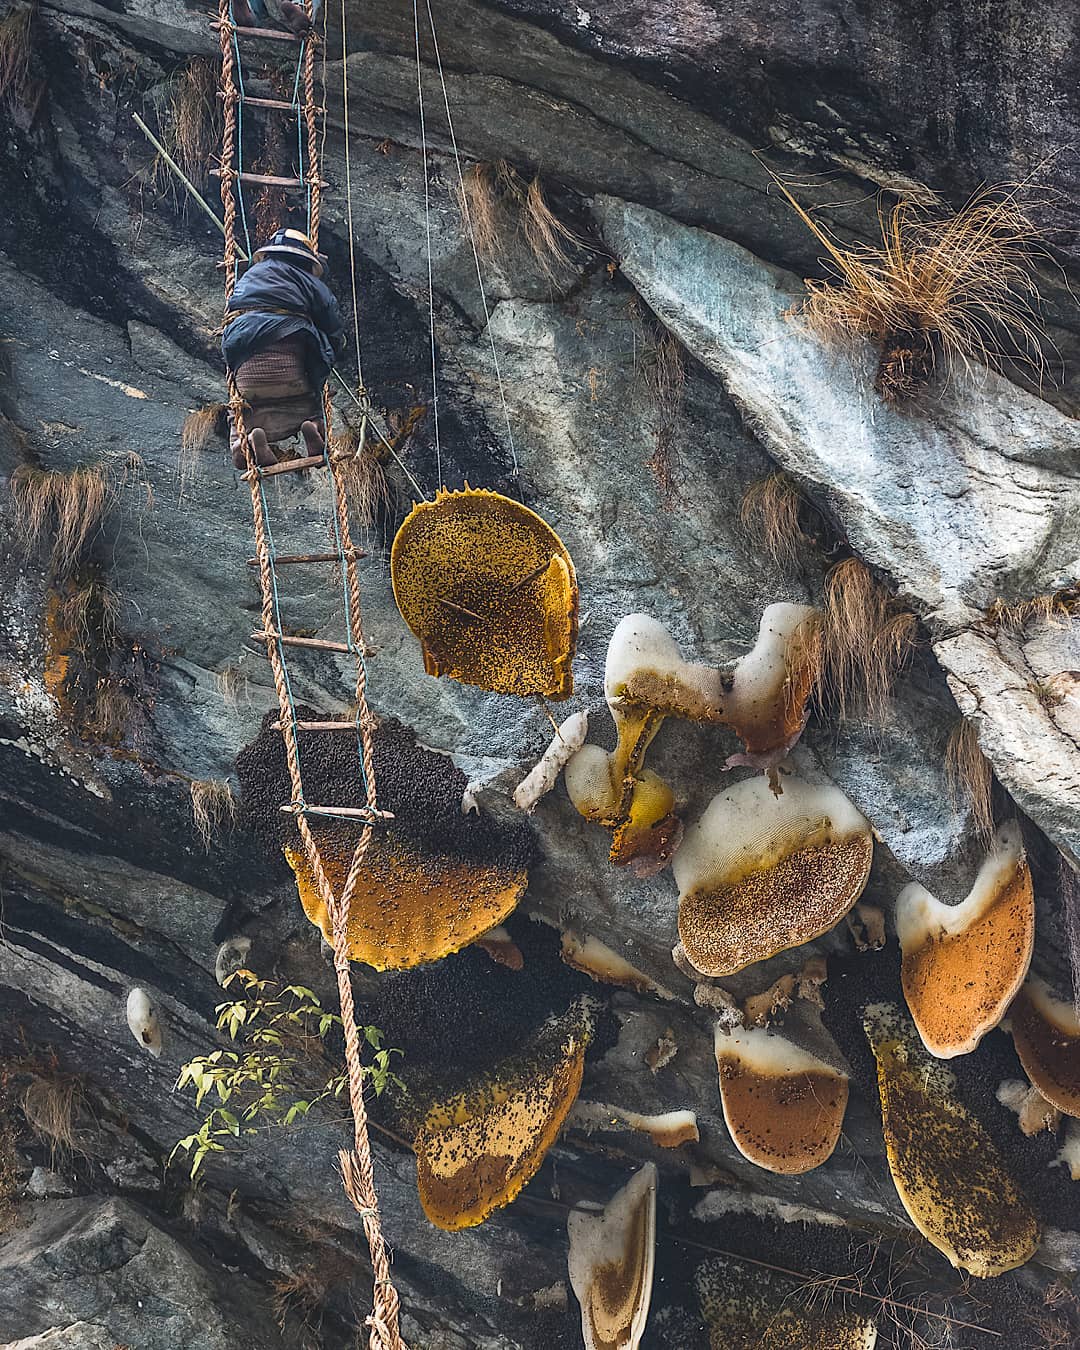 Thrilling Honey Hunting Tour in the high hills cliffs of Nepal